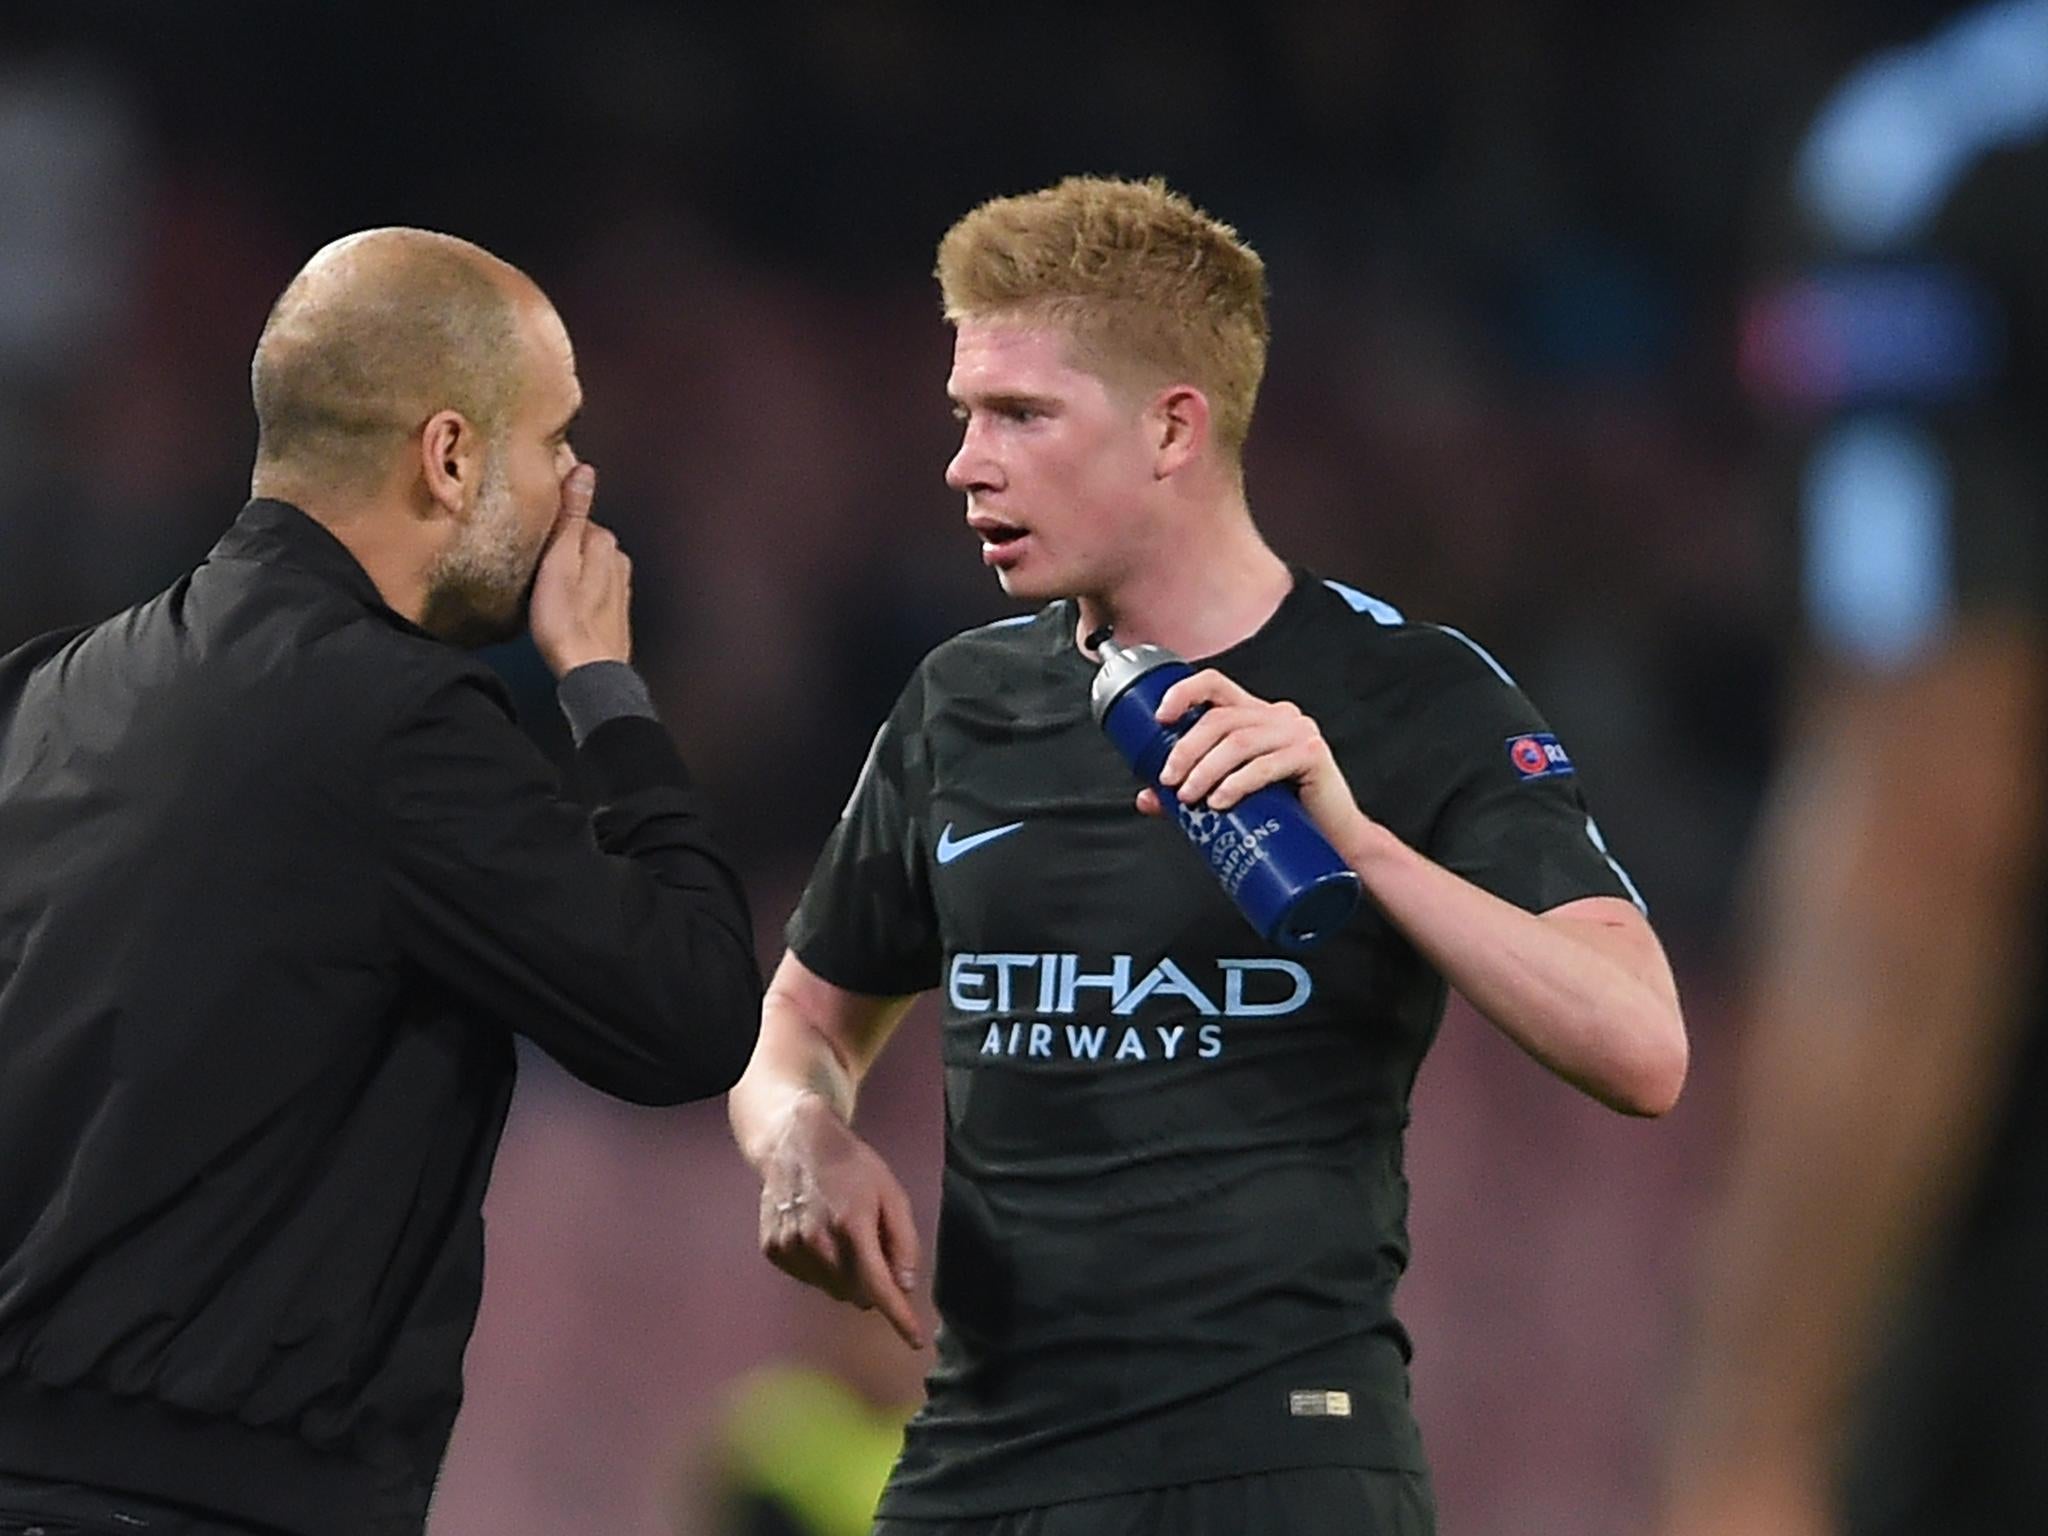 De Bruyne has previously credited Guardiola for making him a better player